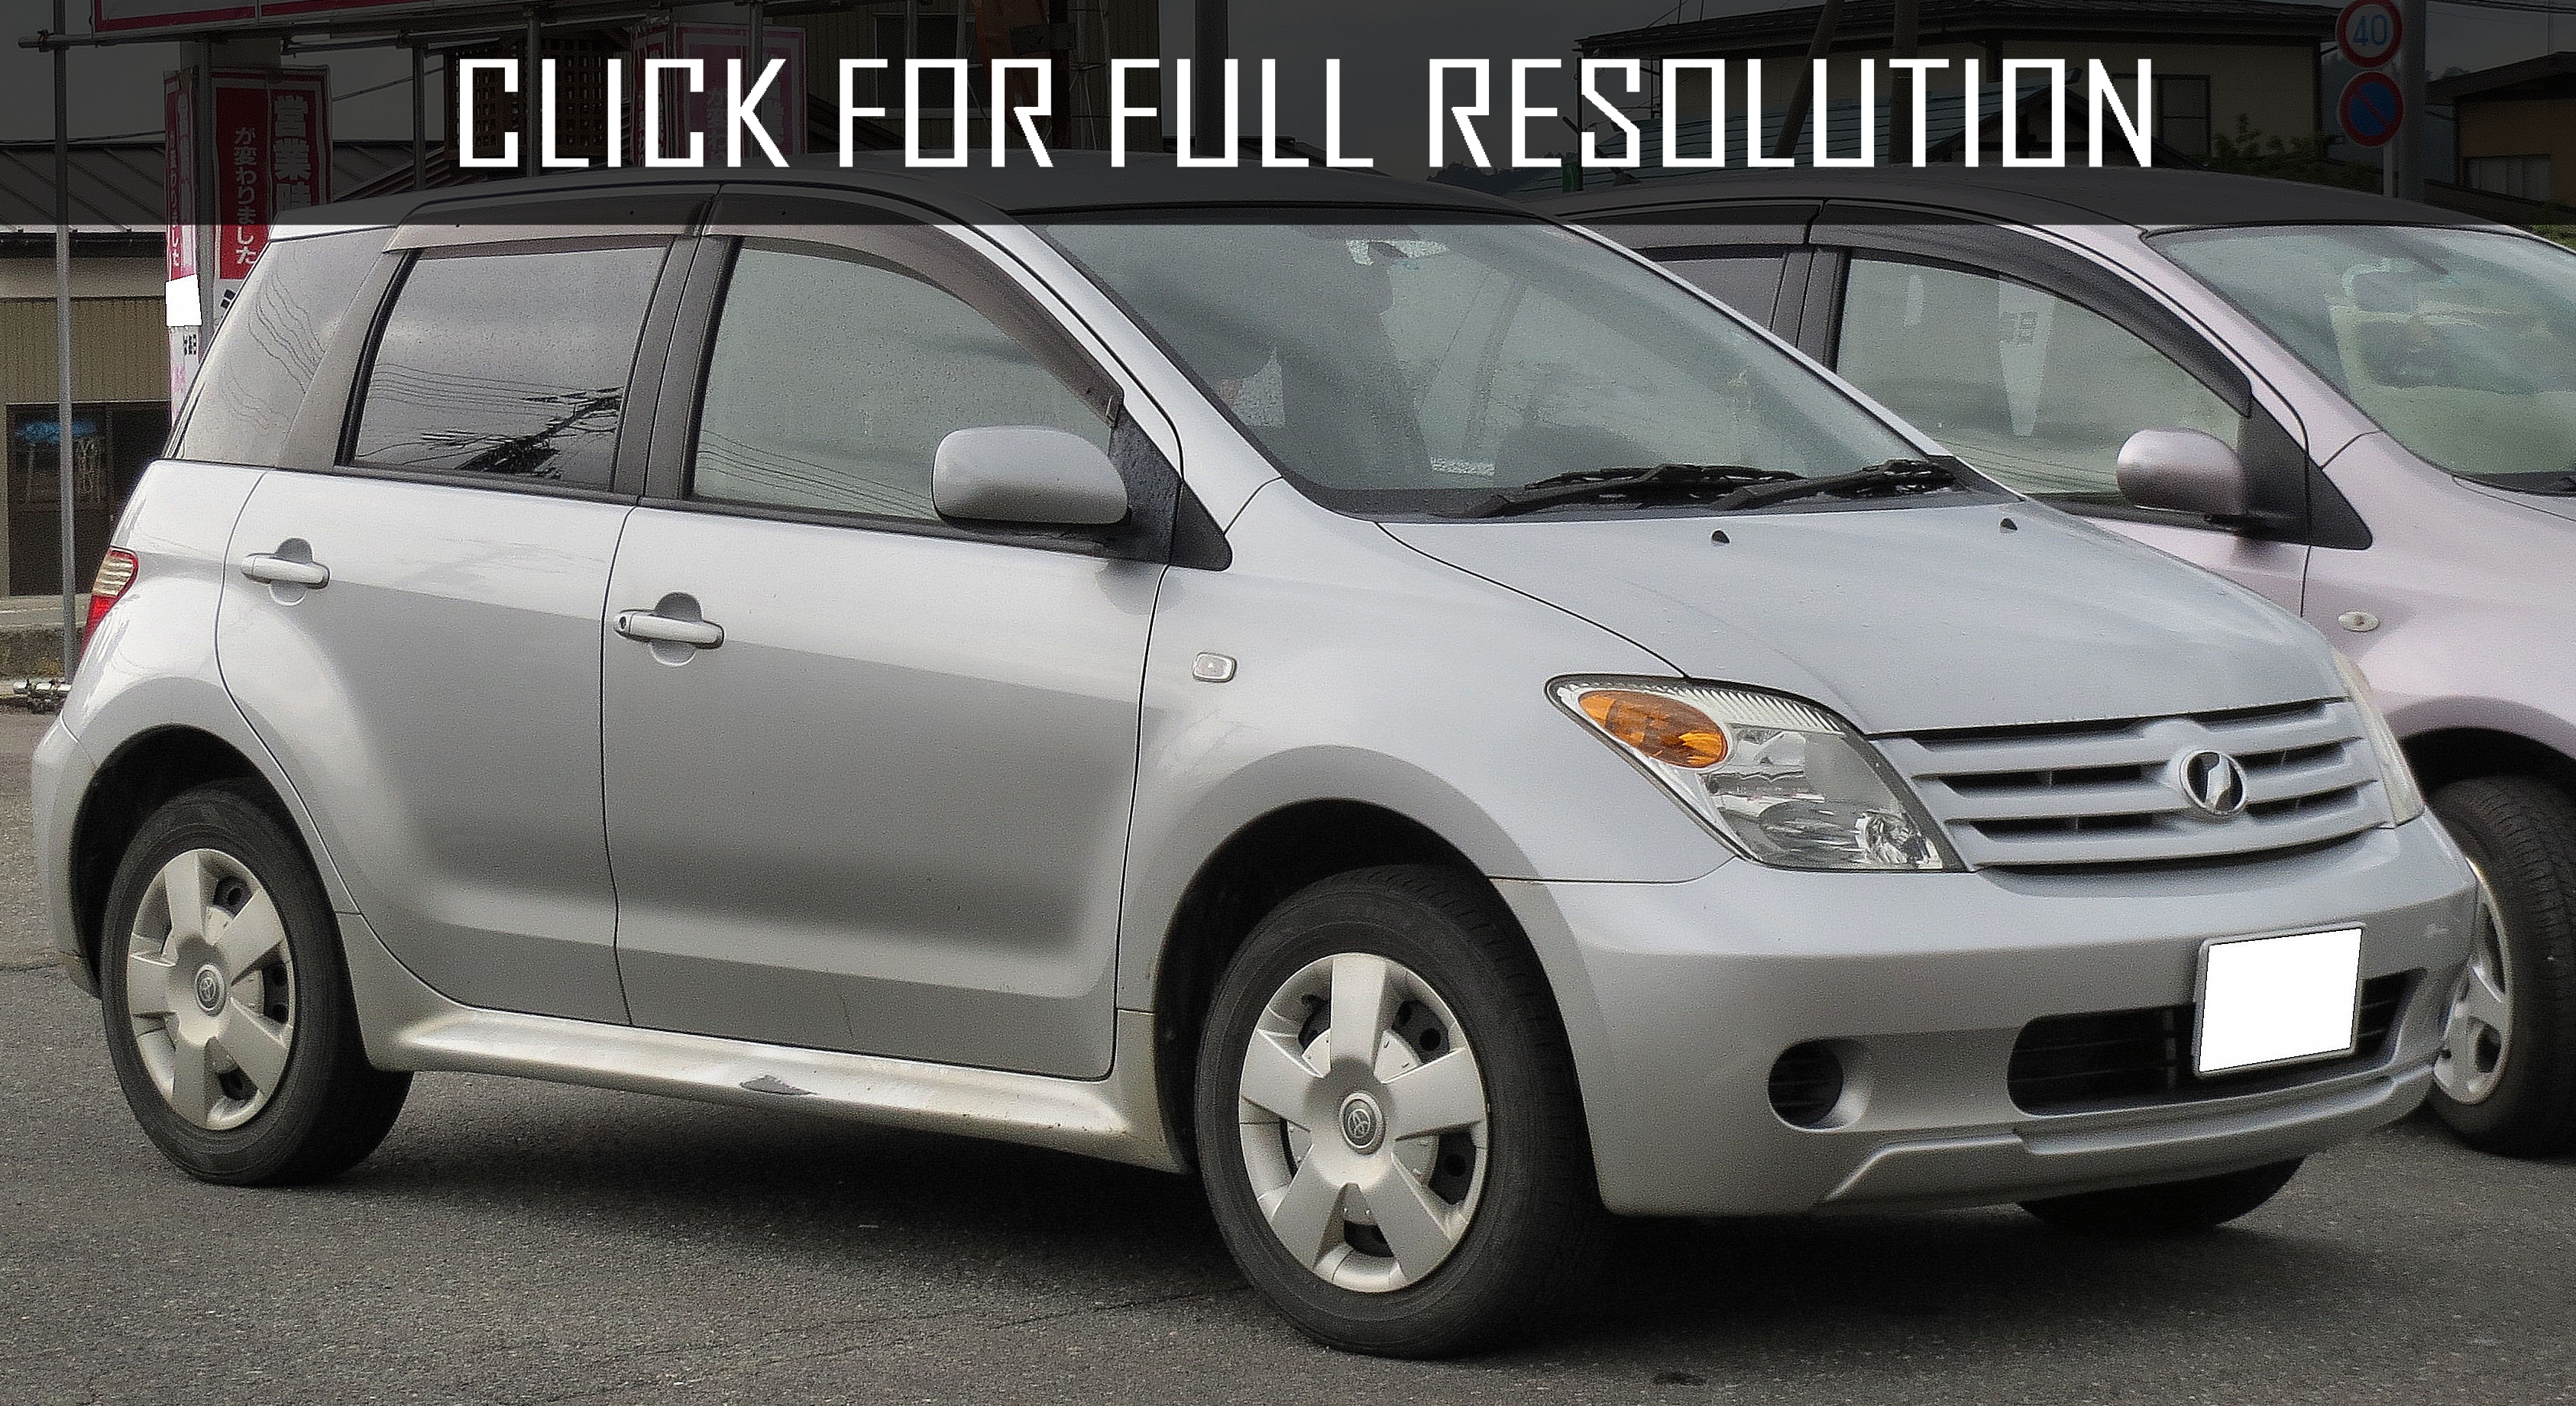 Toyota Ist 2013 Reviews Prices Ratings With Various Photos